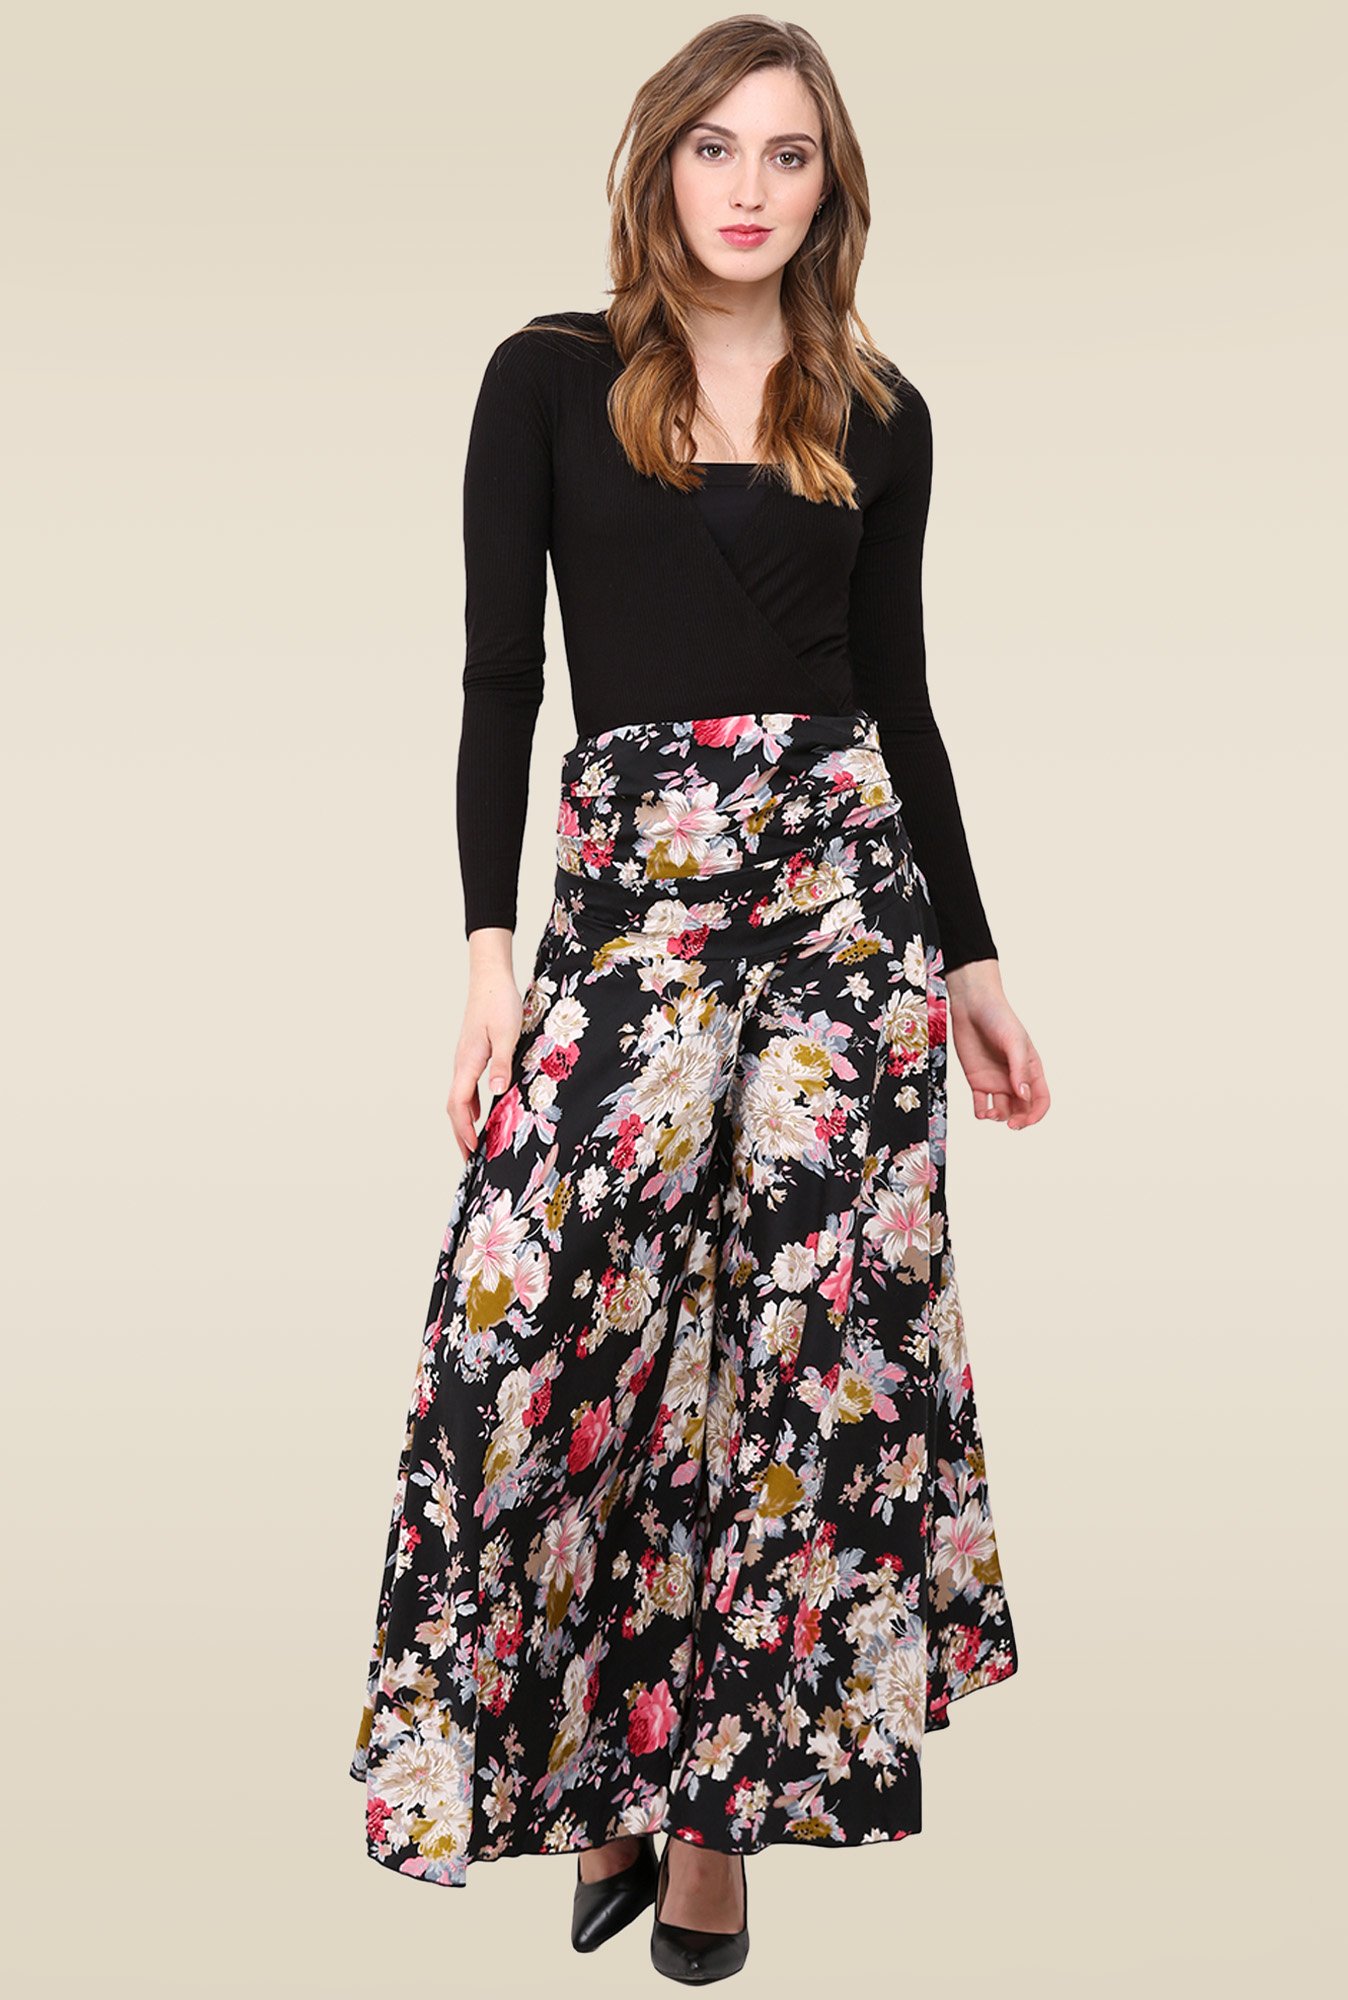 Blue Pleated Floral Palazzo Pants